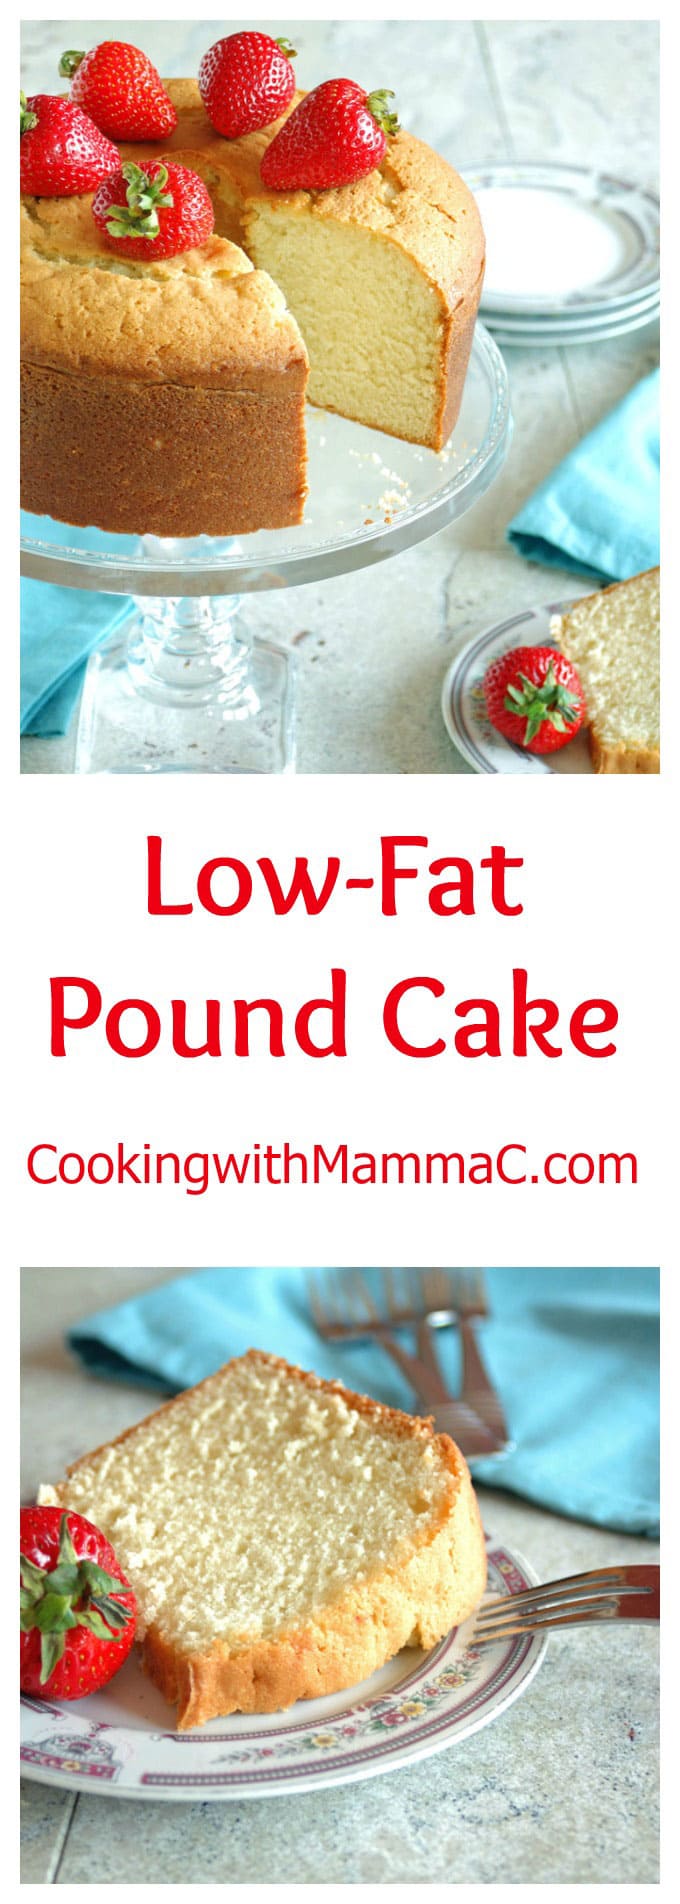 How to make the perfect light & fluffy pound cake! - YouTube